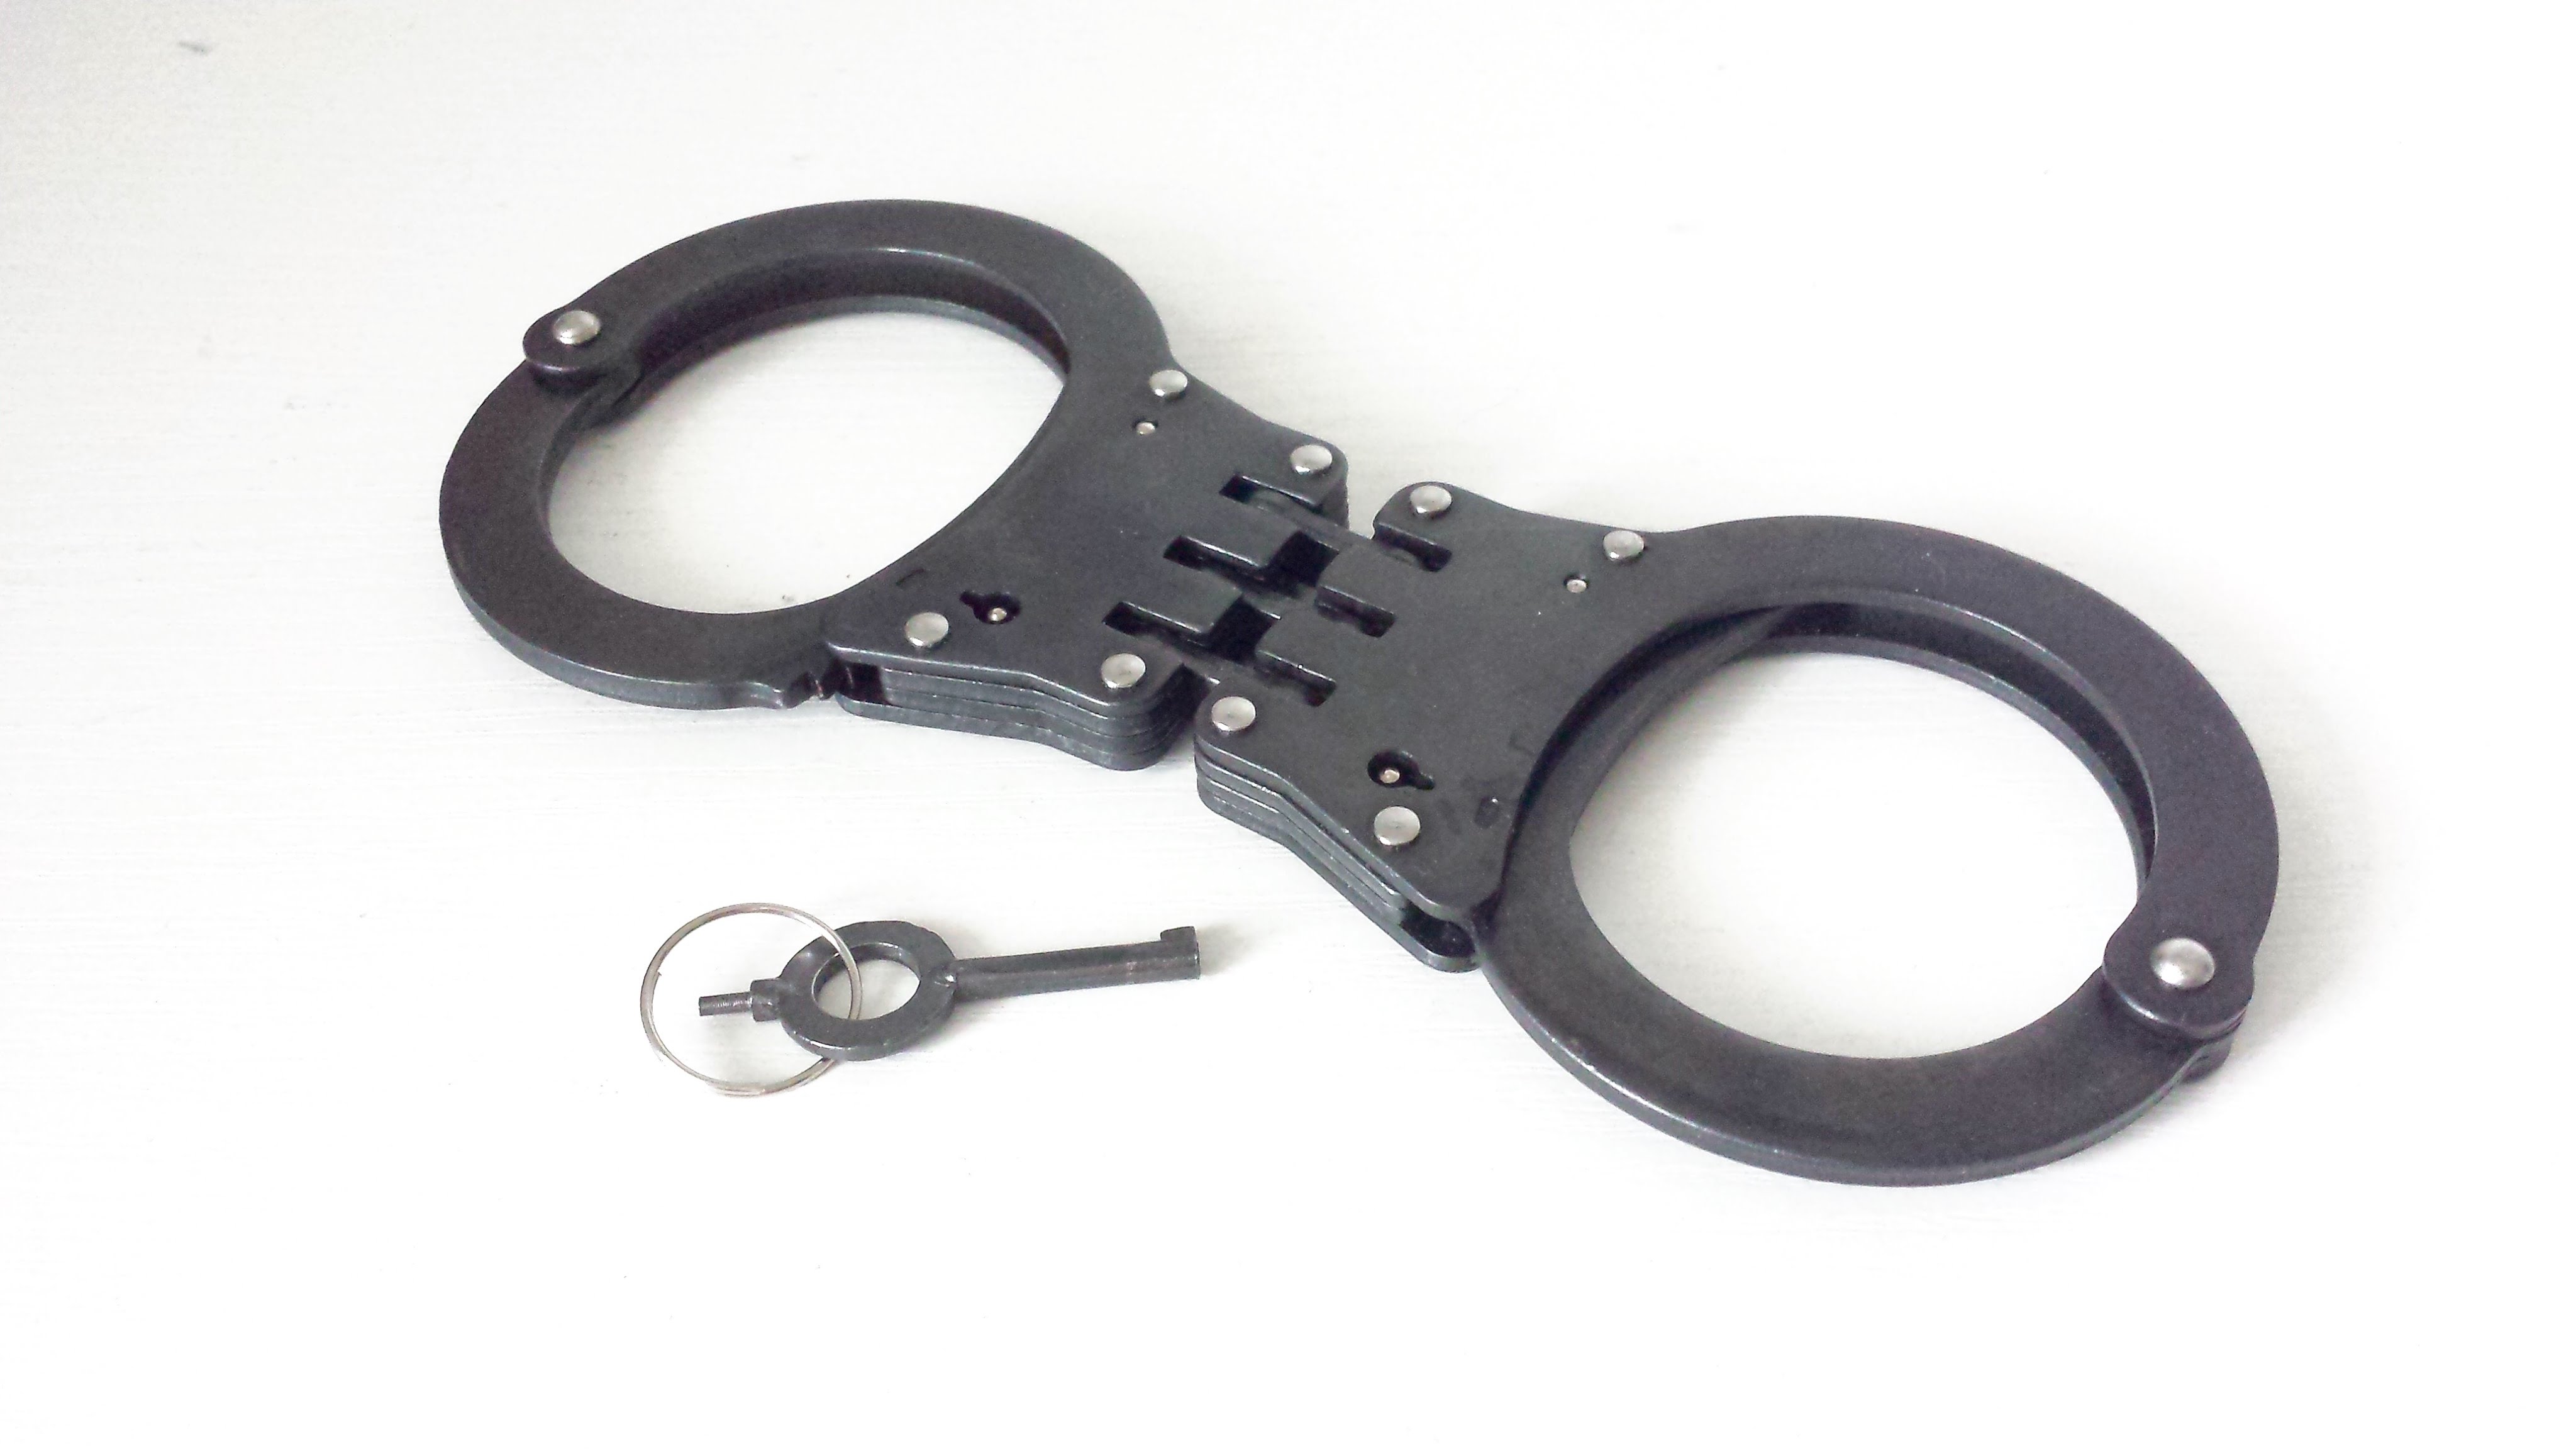 Black Handcuffs - How to use handcuffs (How to escape from handcuffs ...